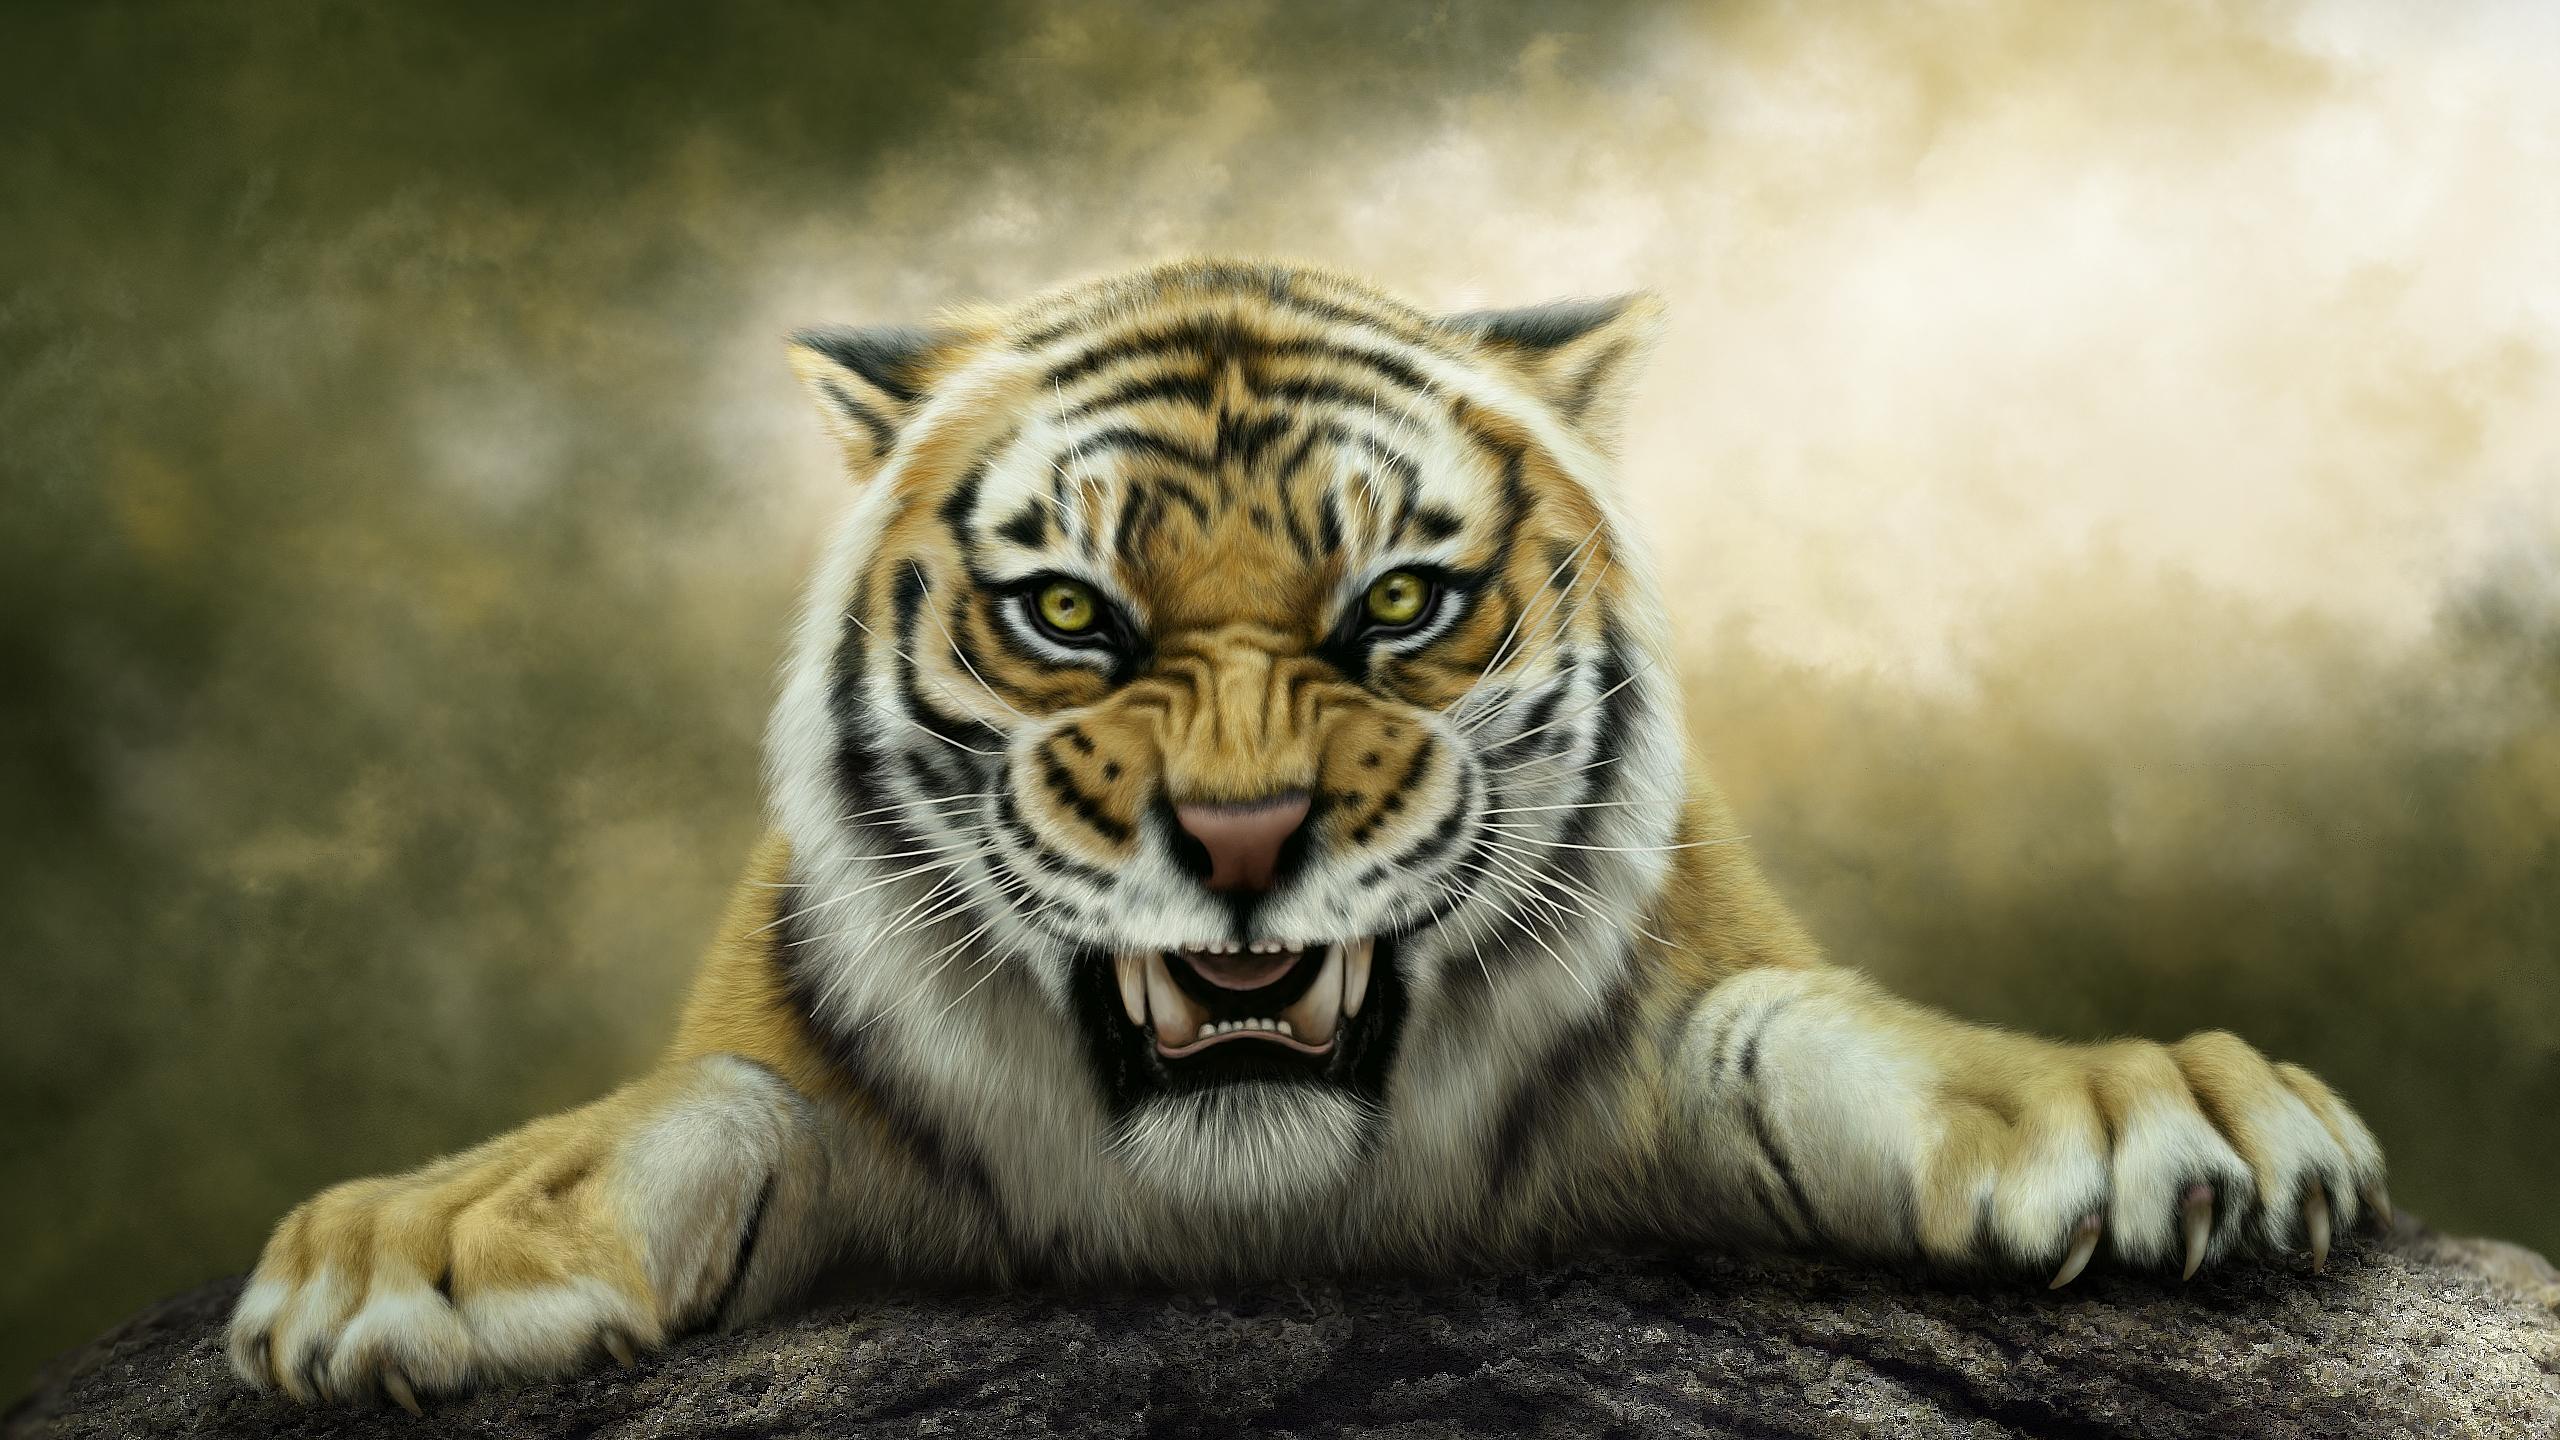 Painting of Growling Tiger HD Wallpaper. Background Image